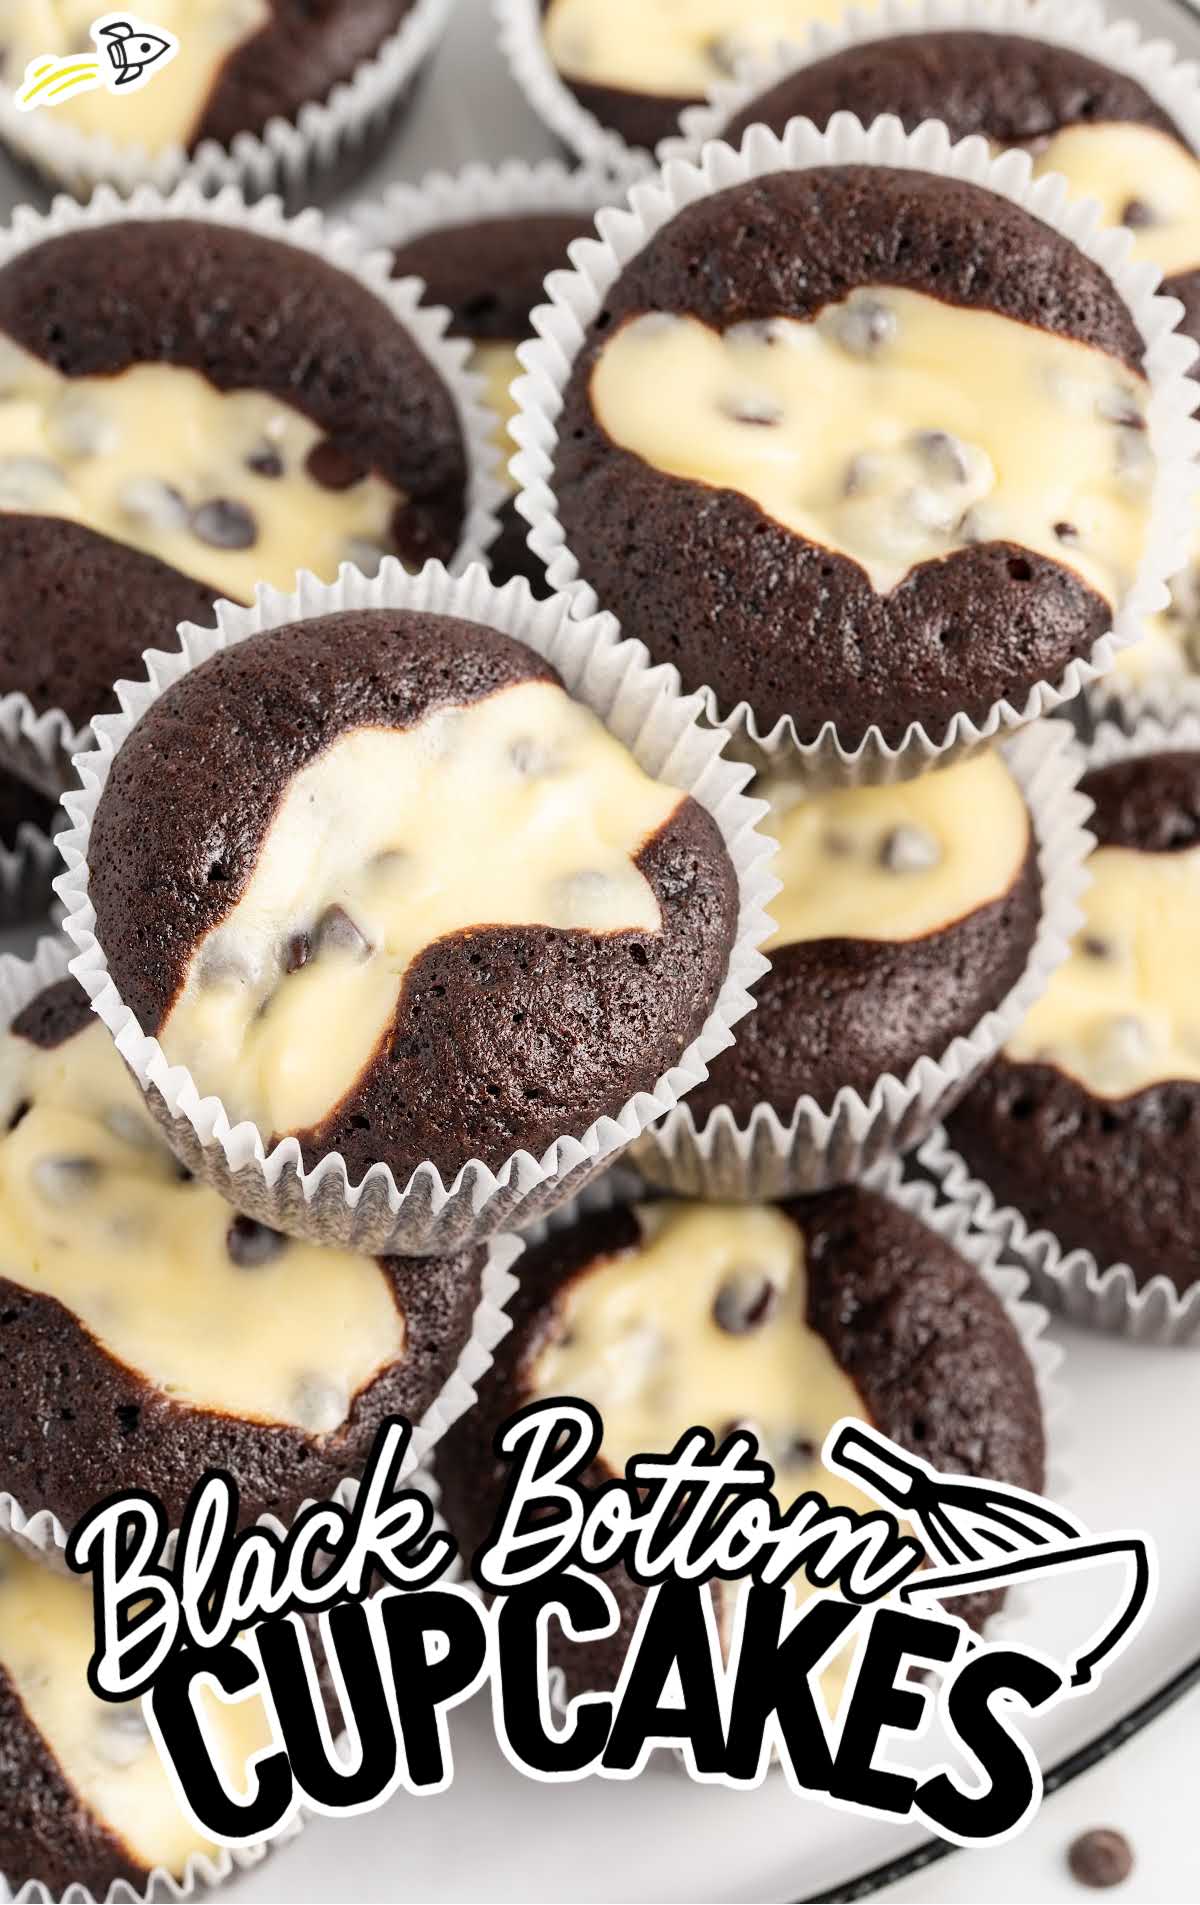 a close up shot of Black Bottom Cupcakes stacked on top of each other.